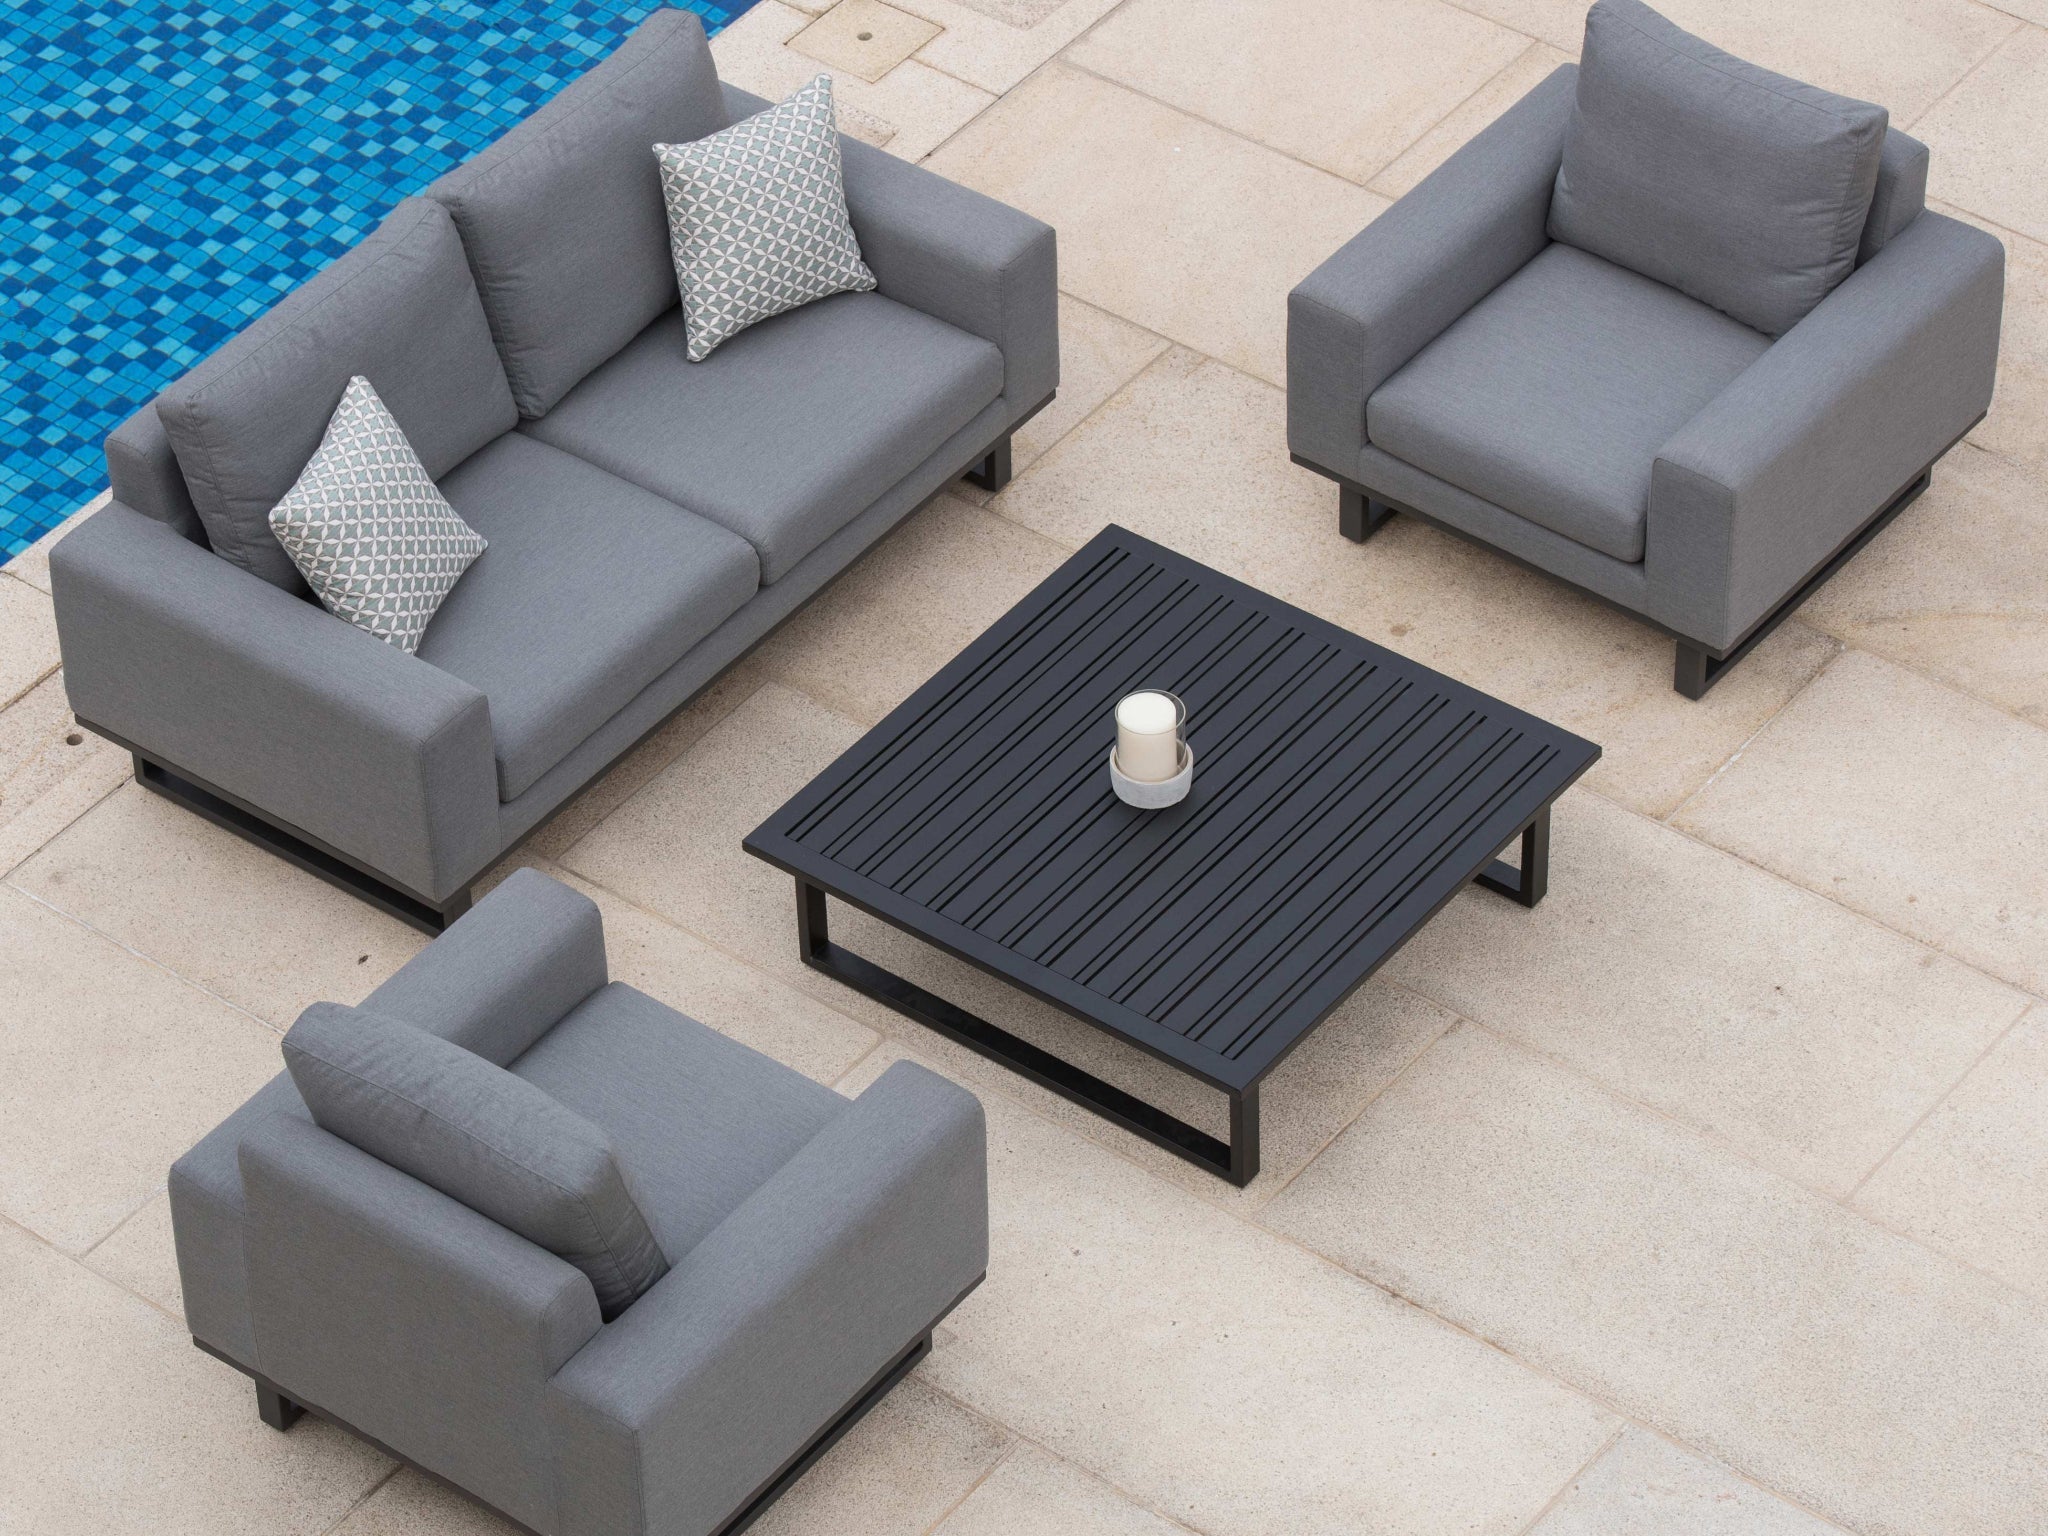 SIMPO Ethos 4-Piece Outdoor Lounge Setting (2-Seater) — Flanelle